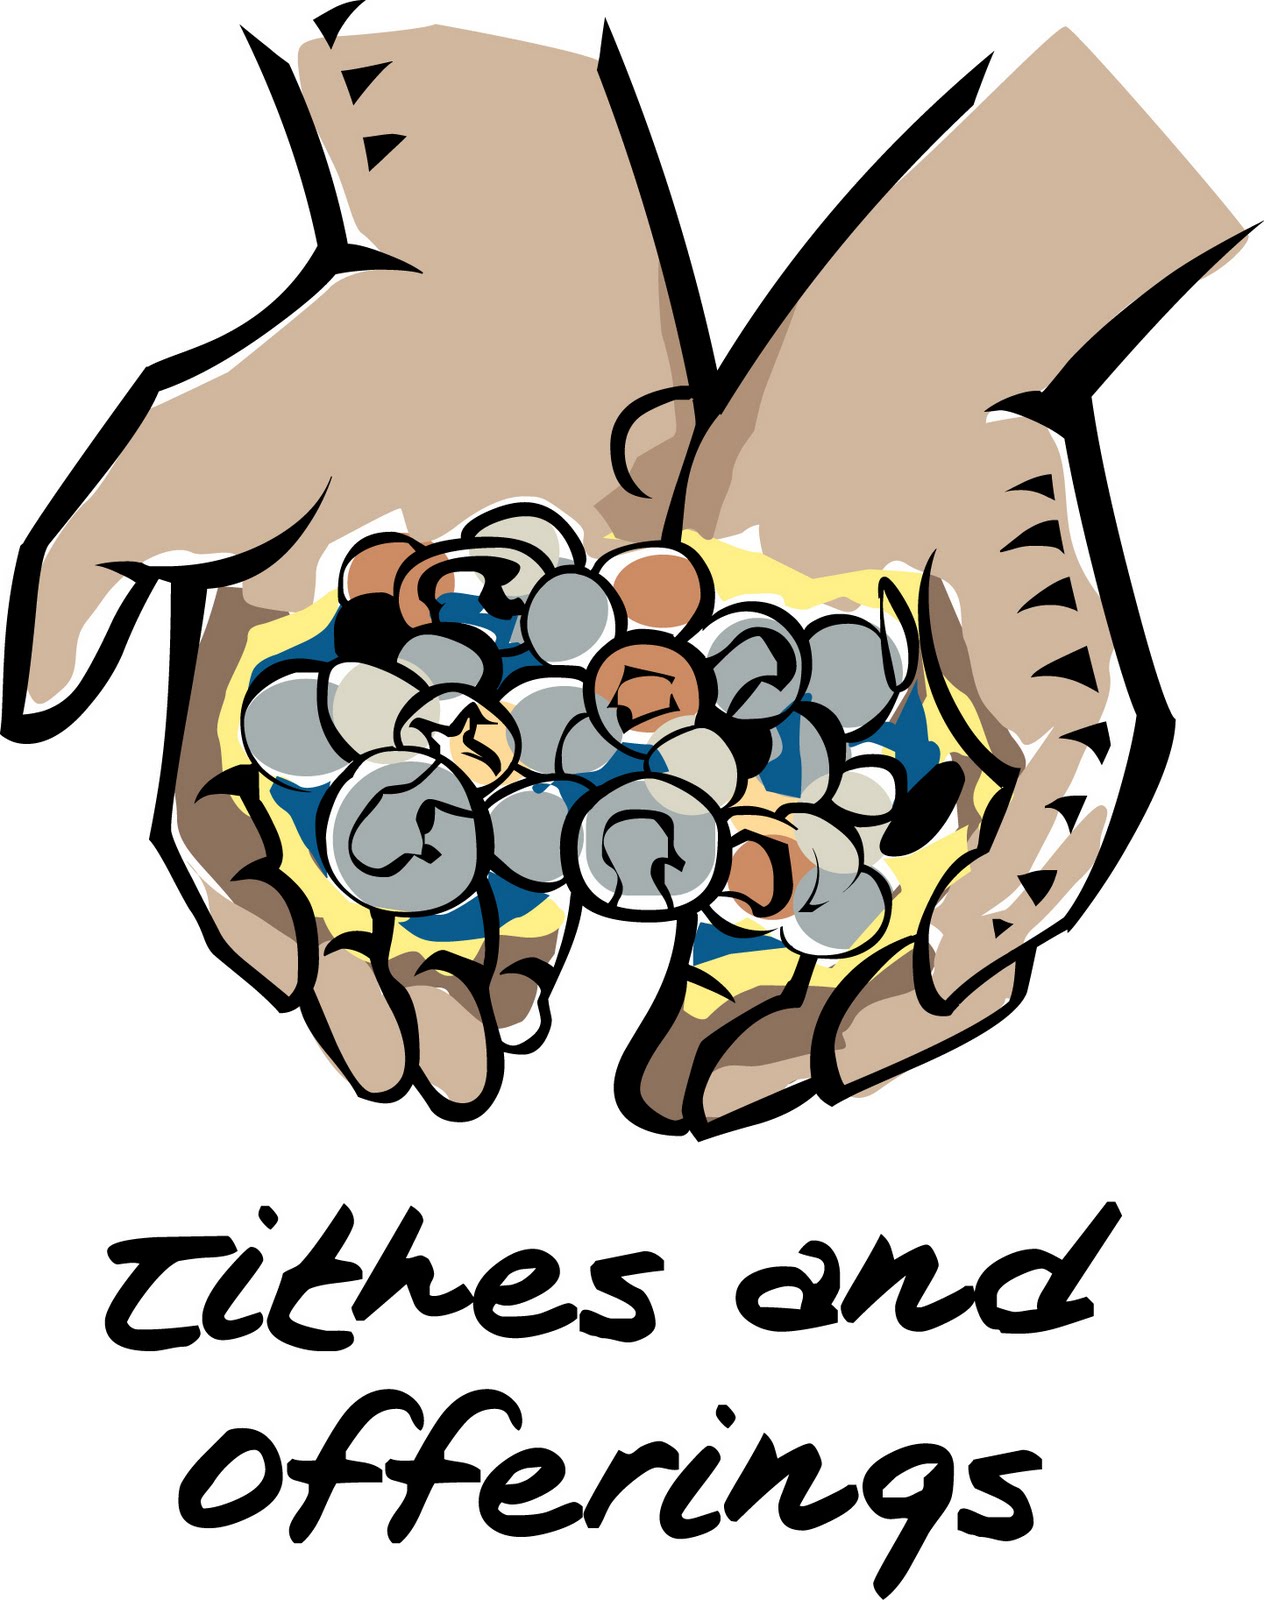 tithes-and-offering-clipart-clip-art-library